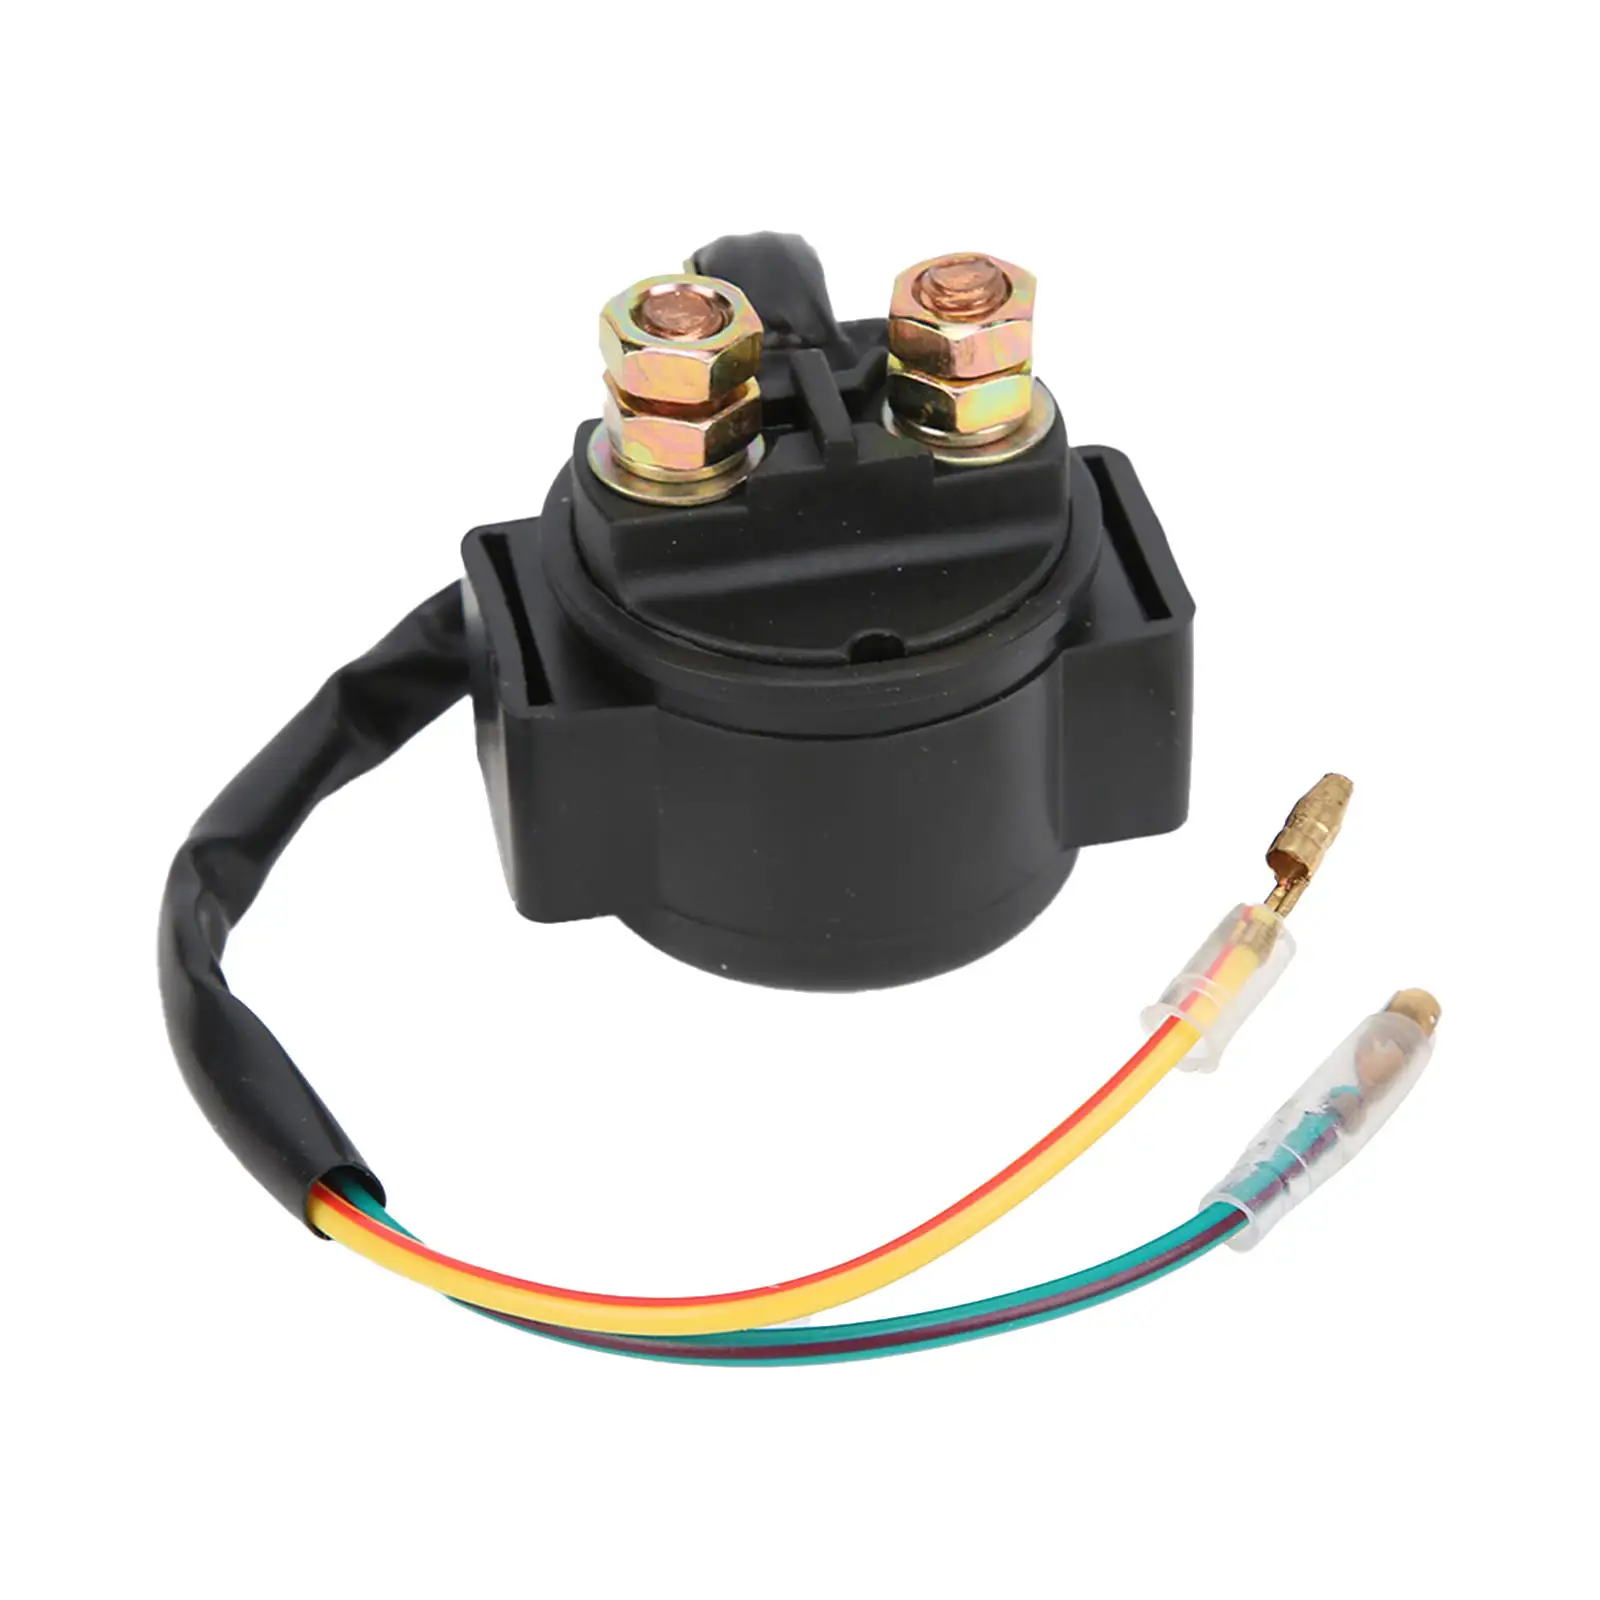 Motorcycle Relay Solenoid Supplies Accessories Durable Starter Solenoid Fit for Honda TRX400EX 1999-2004 2003 2004 for Fourtrax